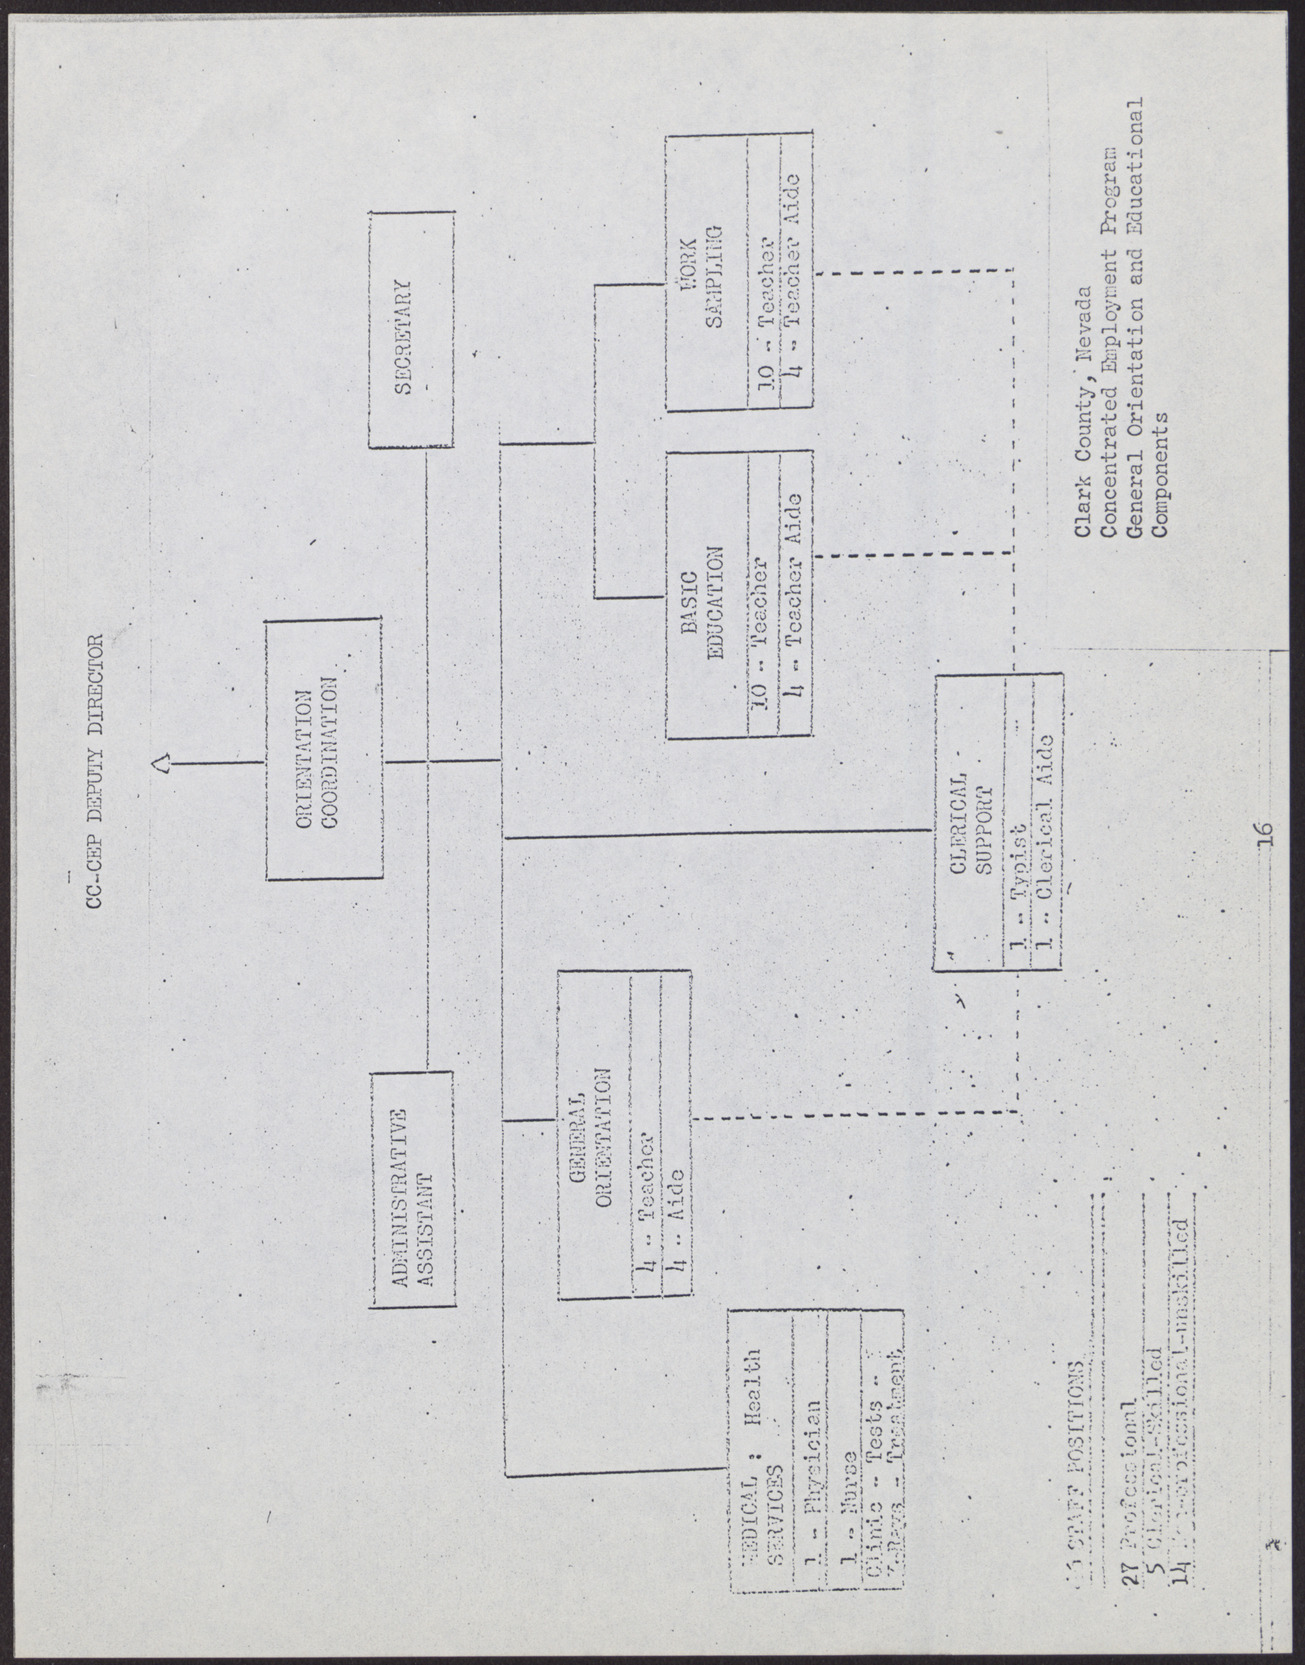 Proposal to the Clark County, Nevada Concentrated Employment Program (21 pages, missing some pages/sections listed in its table of contents), July 2, 1968, page 20